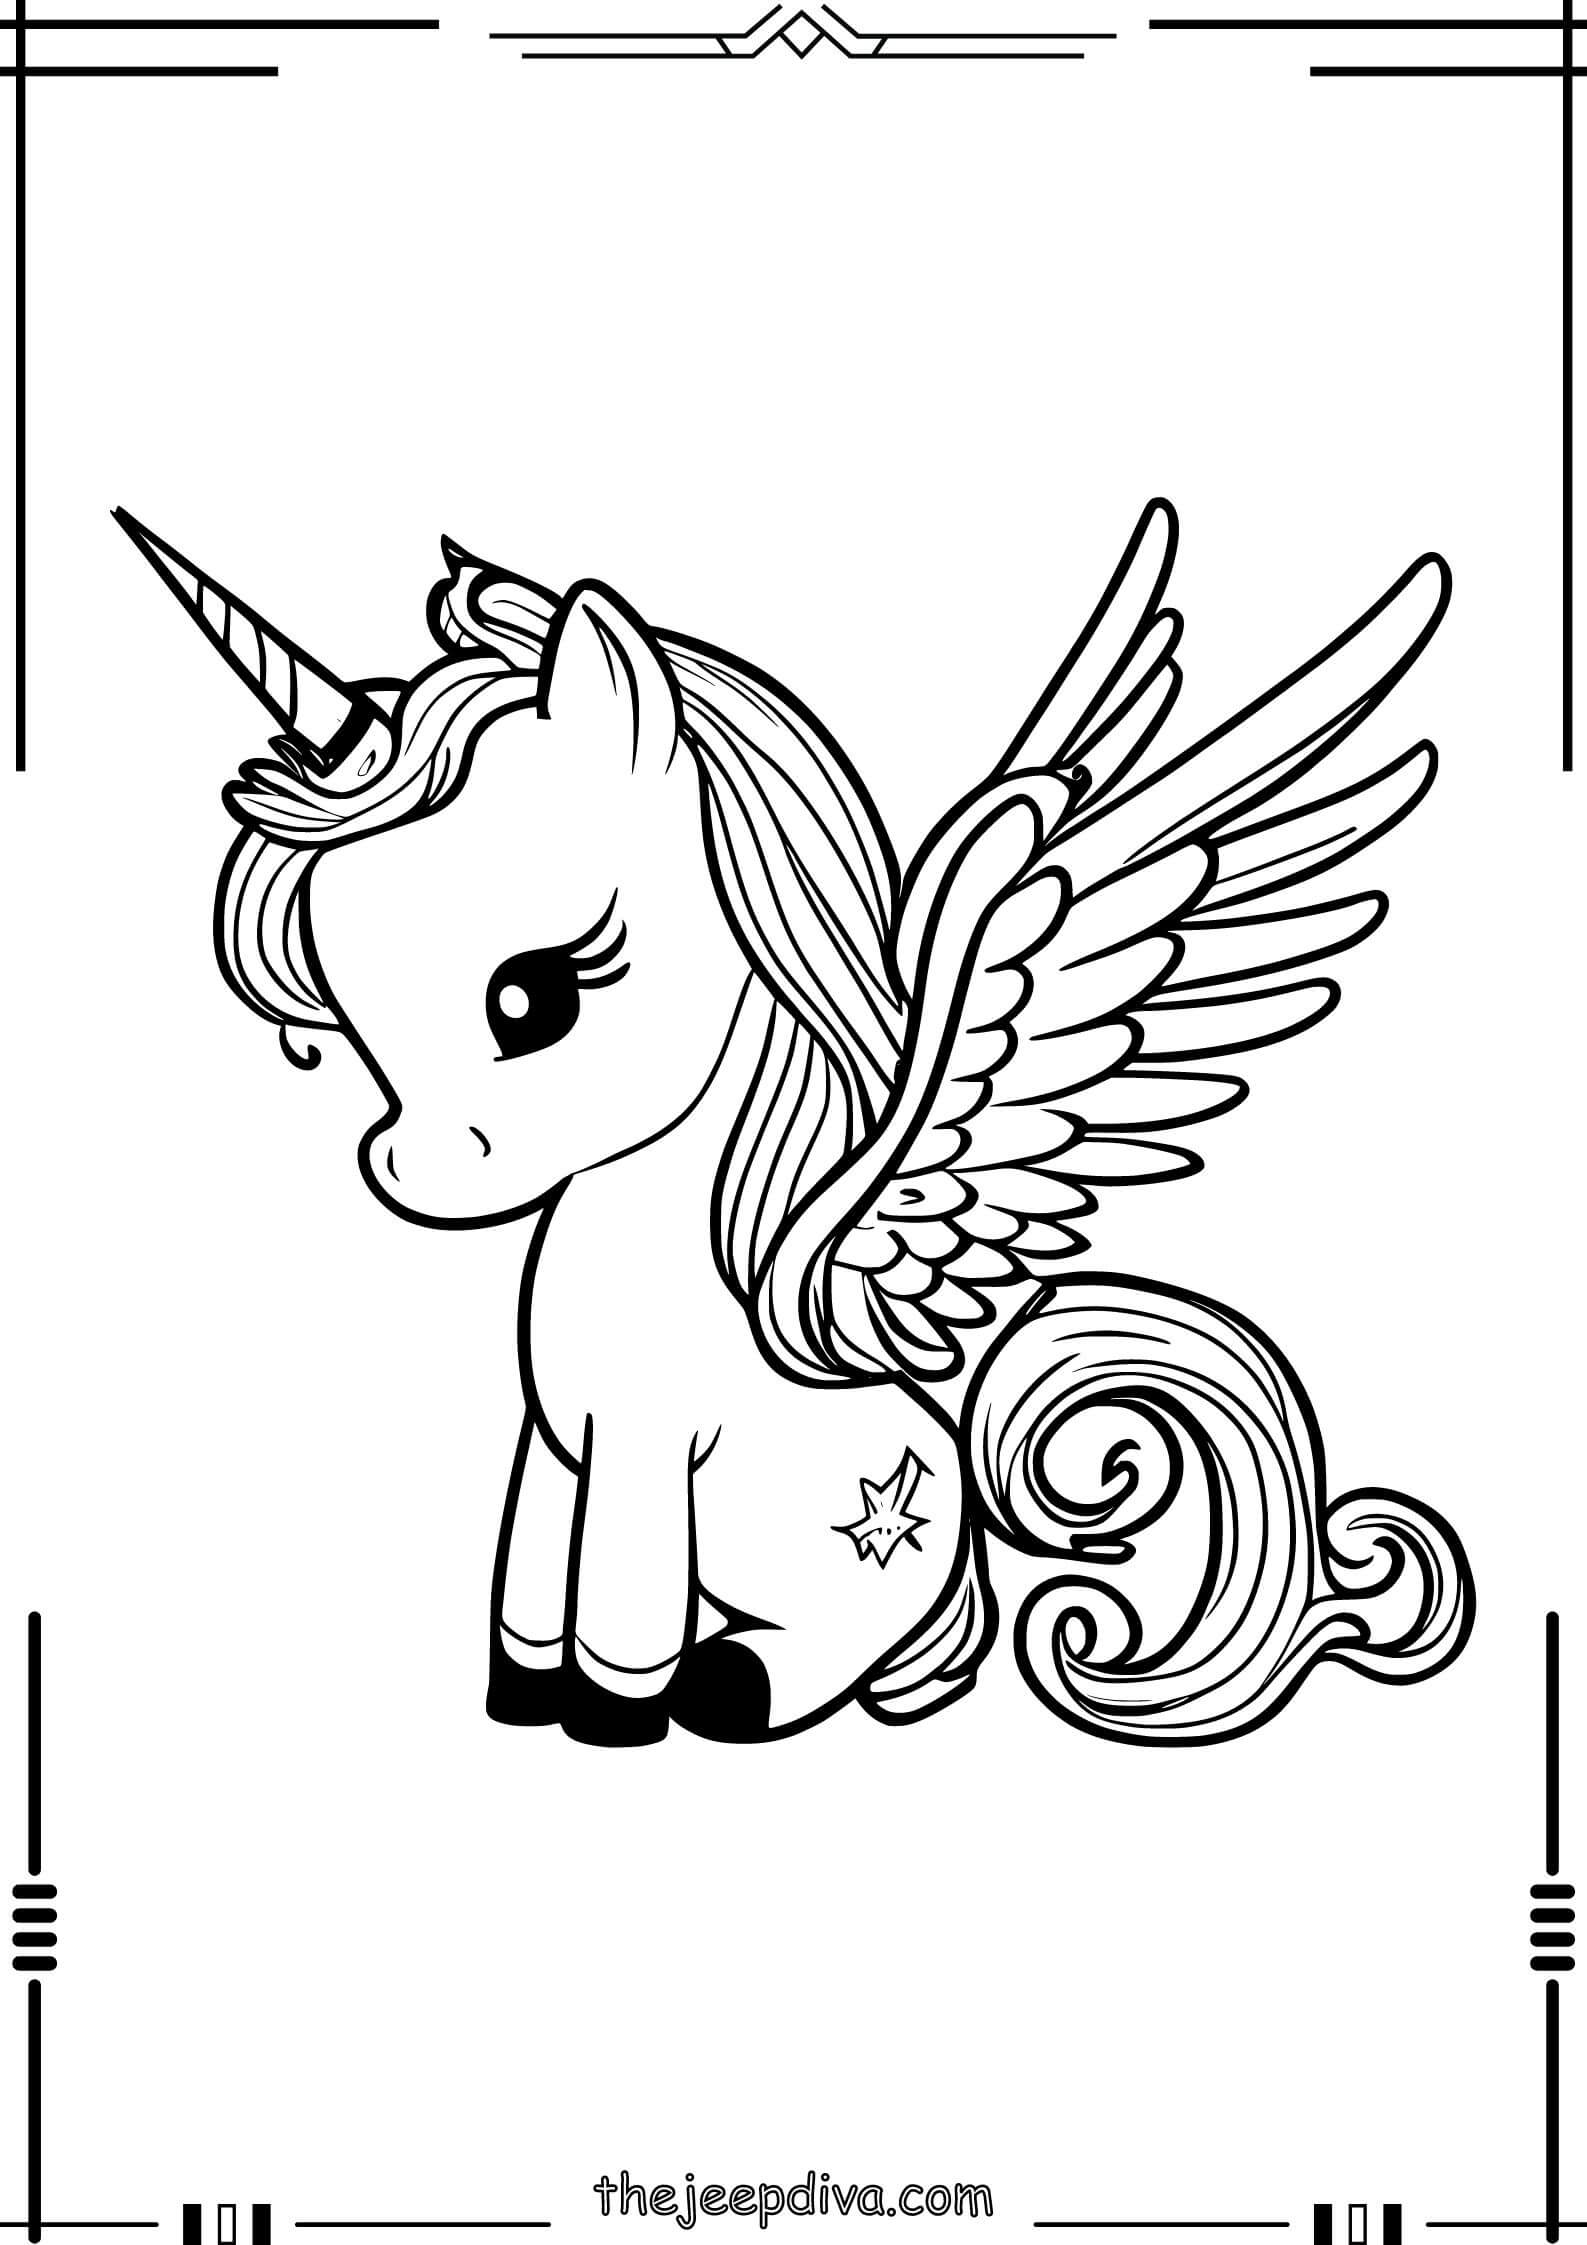 unicorn-coloring-page-easy-14